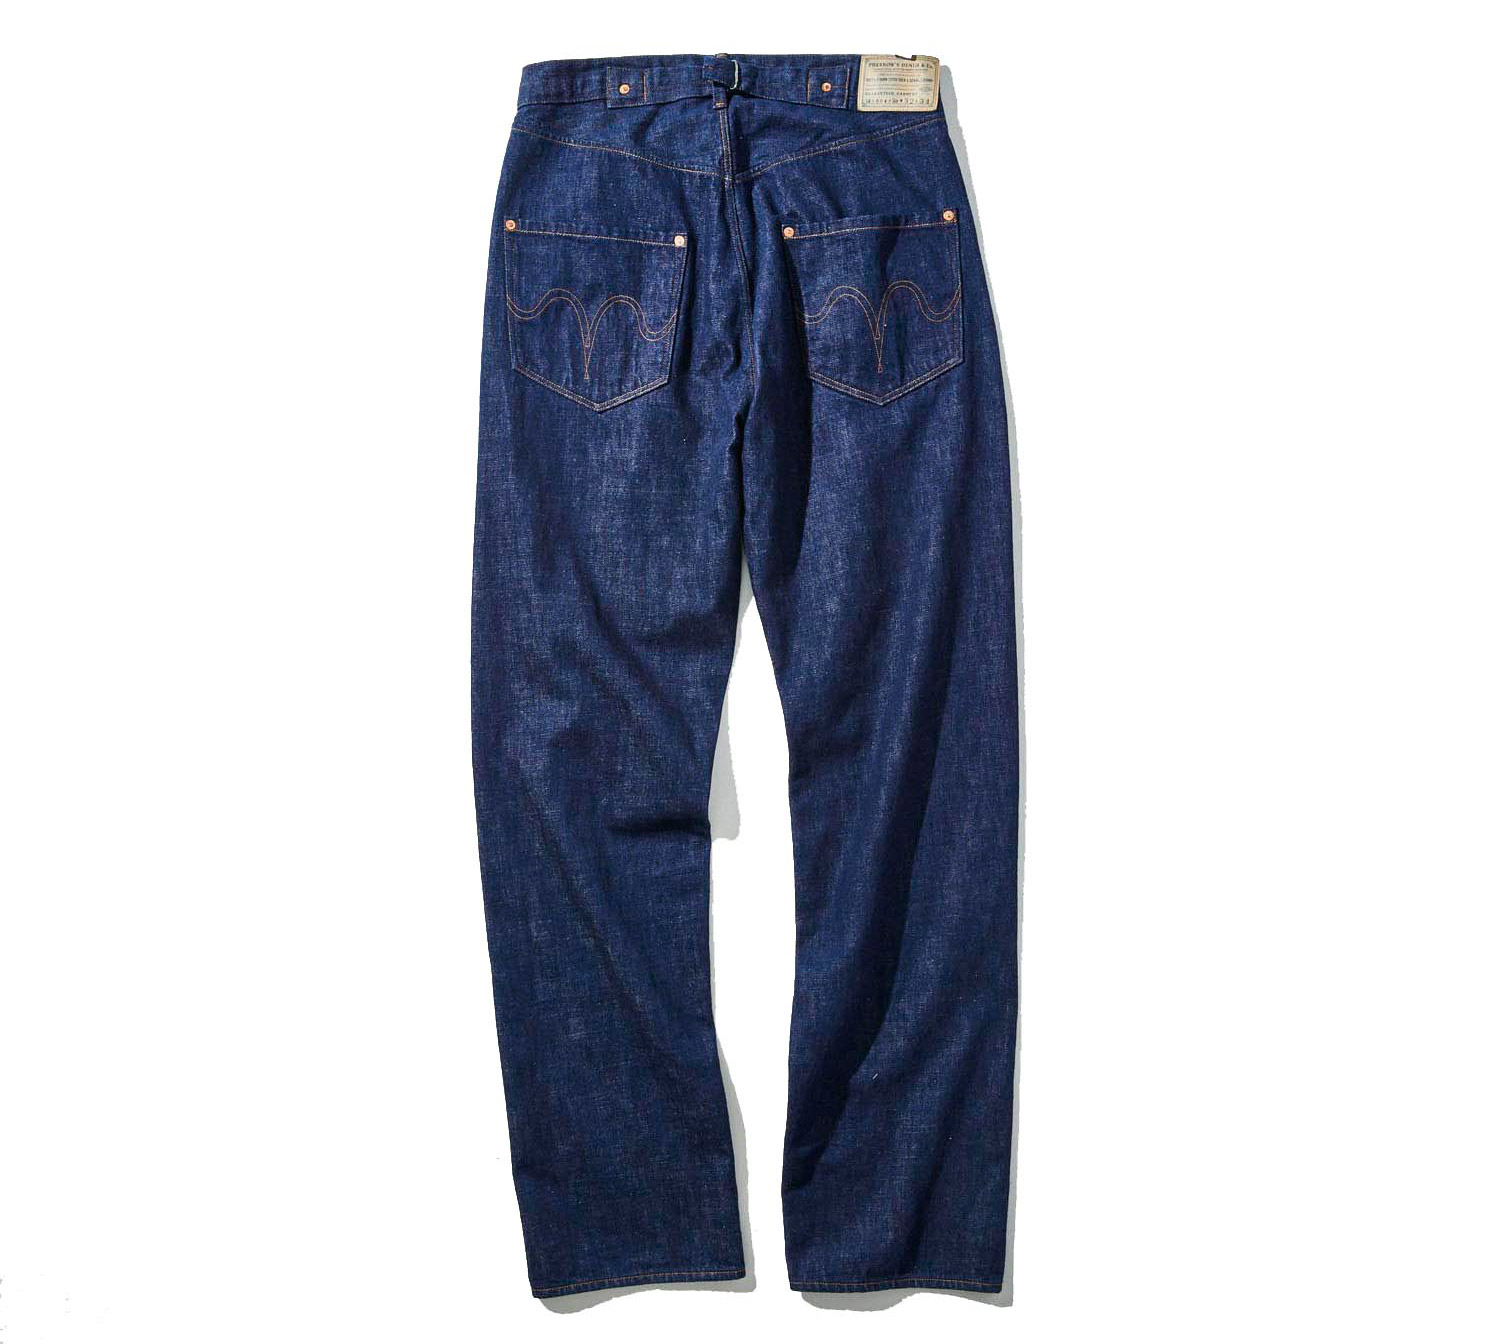 TCB Jeans / Pherrows releases denim with 